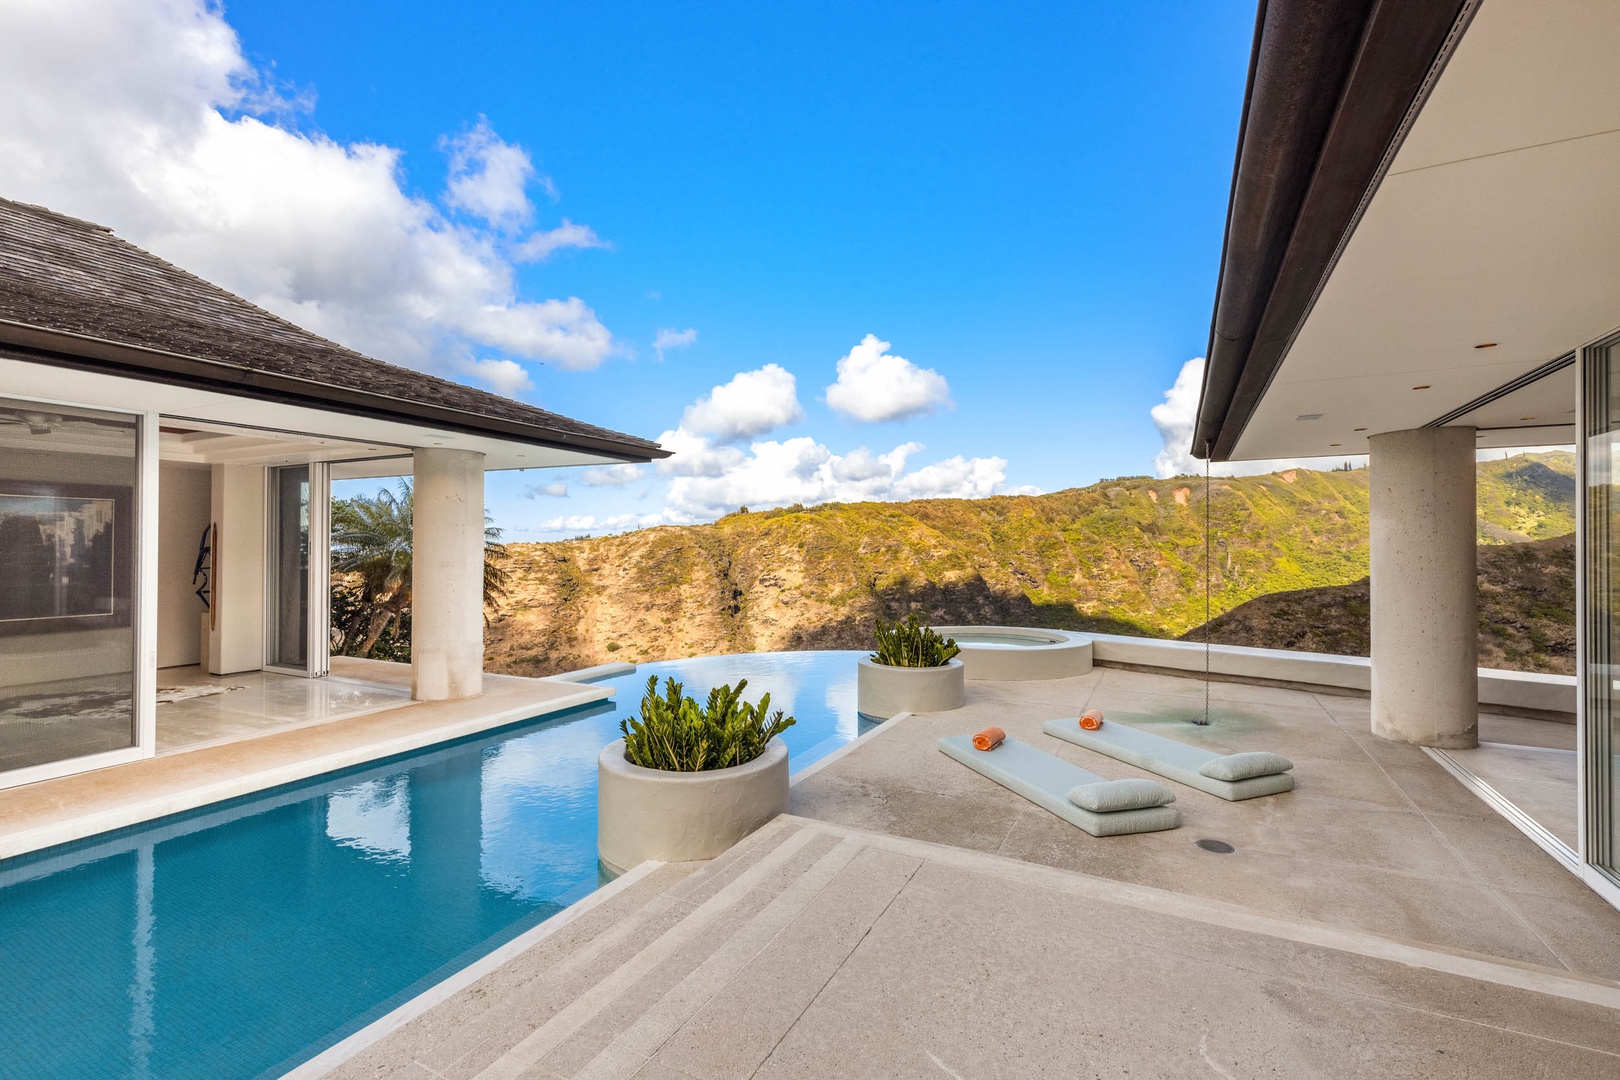 Honolulu Vacation Rentals, Sky Ridge House - Dive into the azure embrace of this infinity pool, where the water's edge seamlessly merges with the stunning mountainous horizon